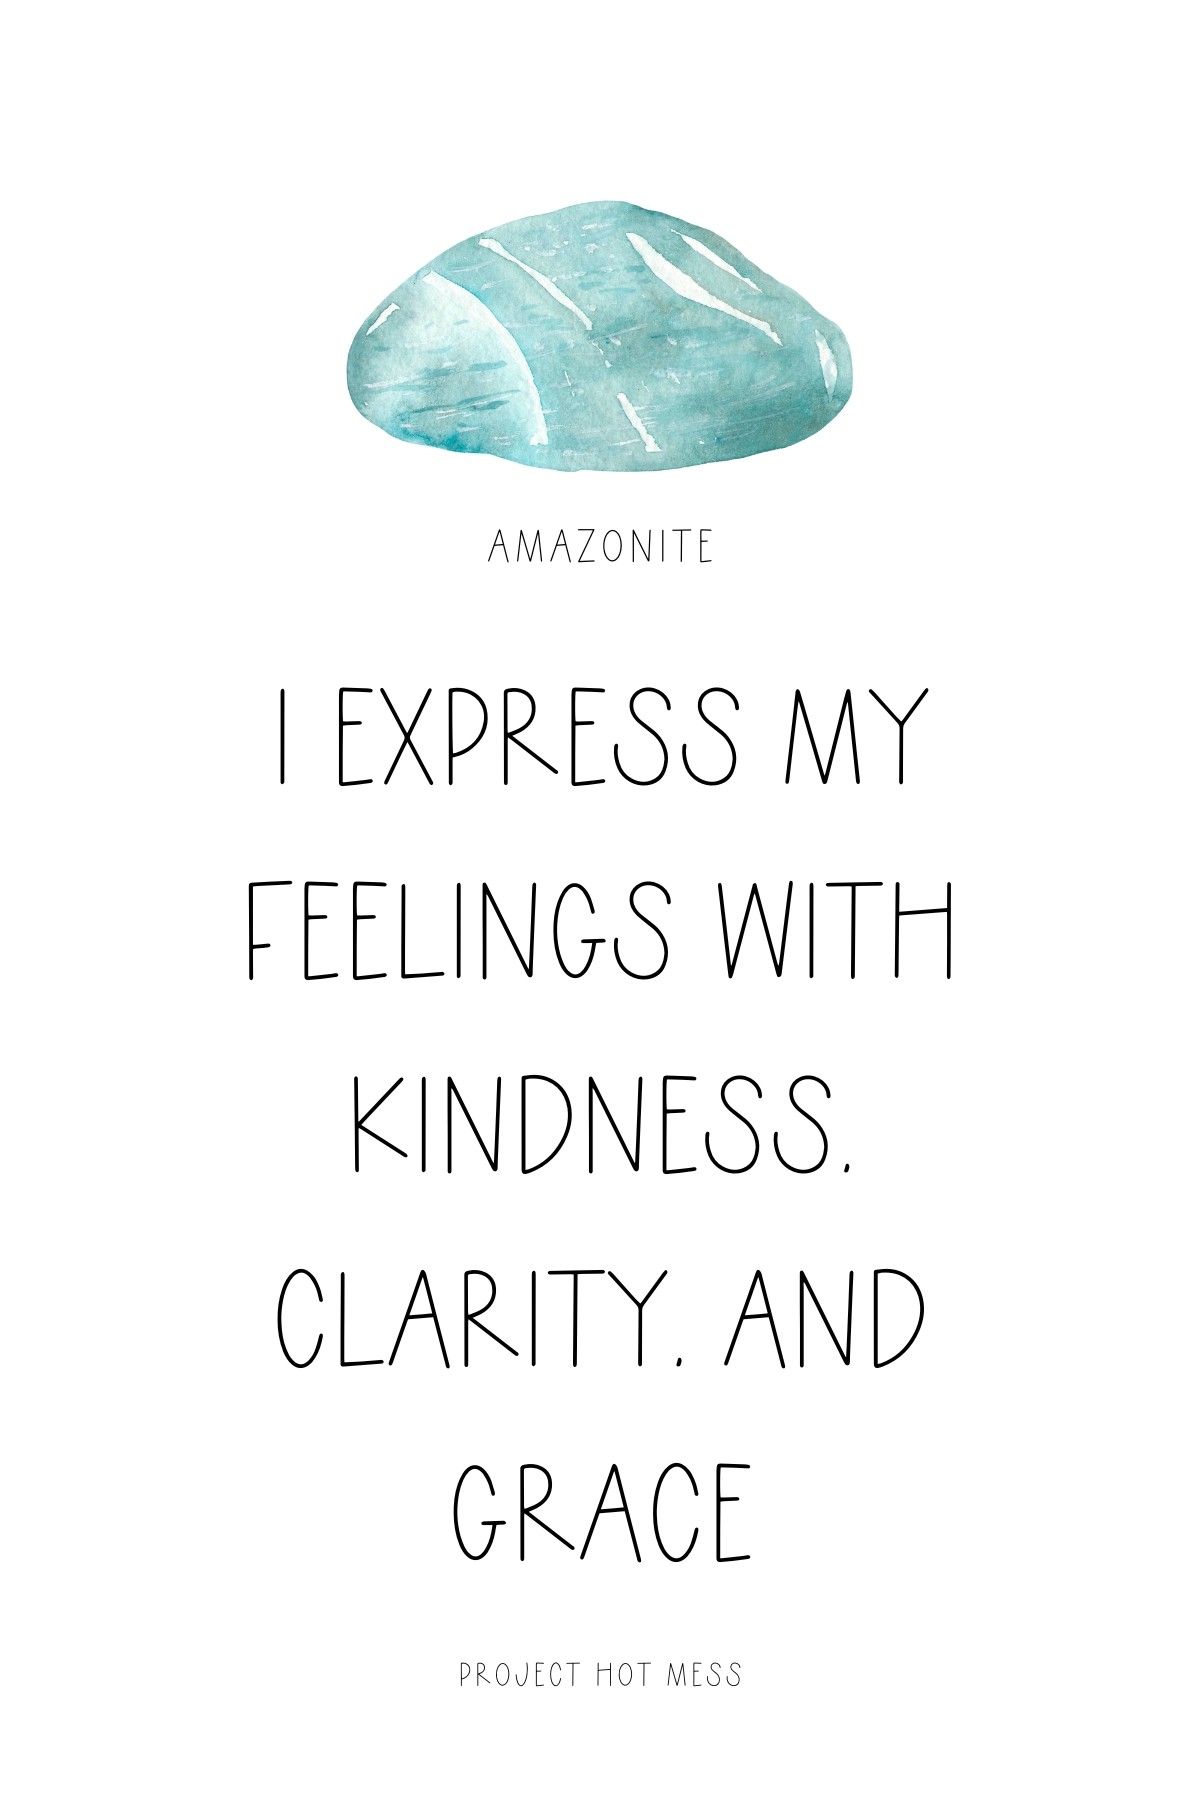 Create your own crystal affirmations by pairing your favorite affirmation with a crystal that matches it's energy and intention (or vice versa).